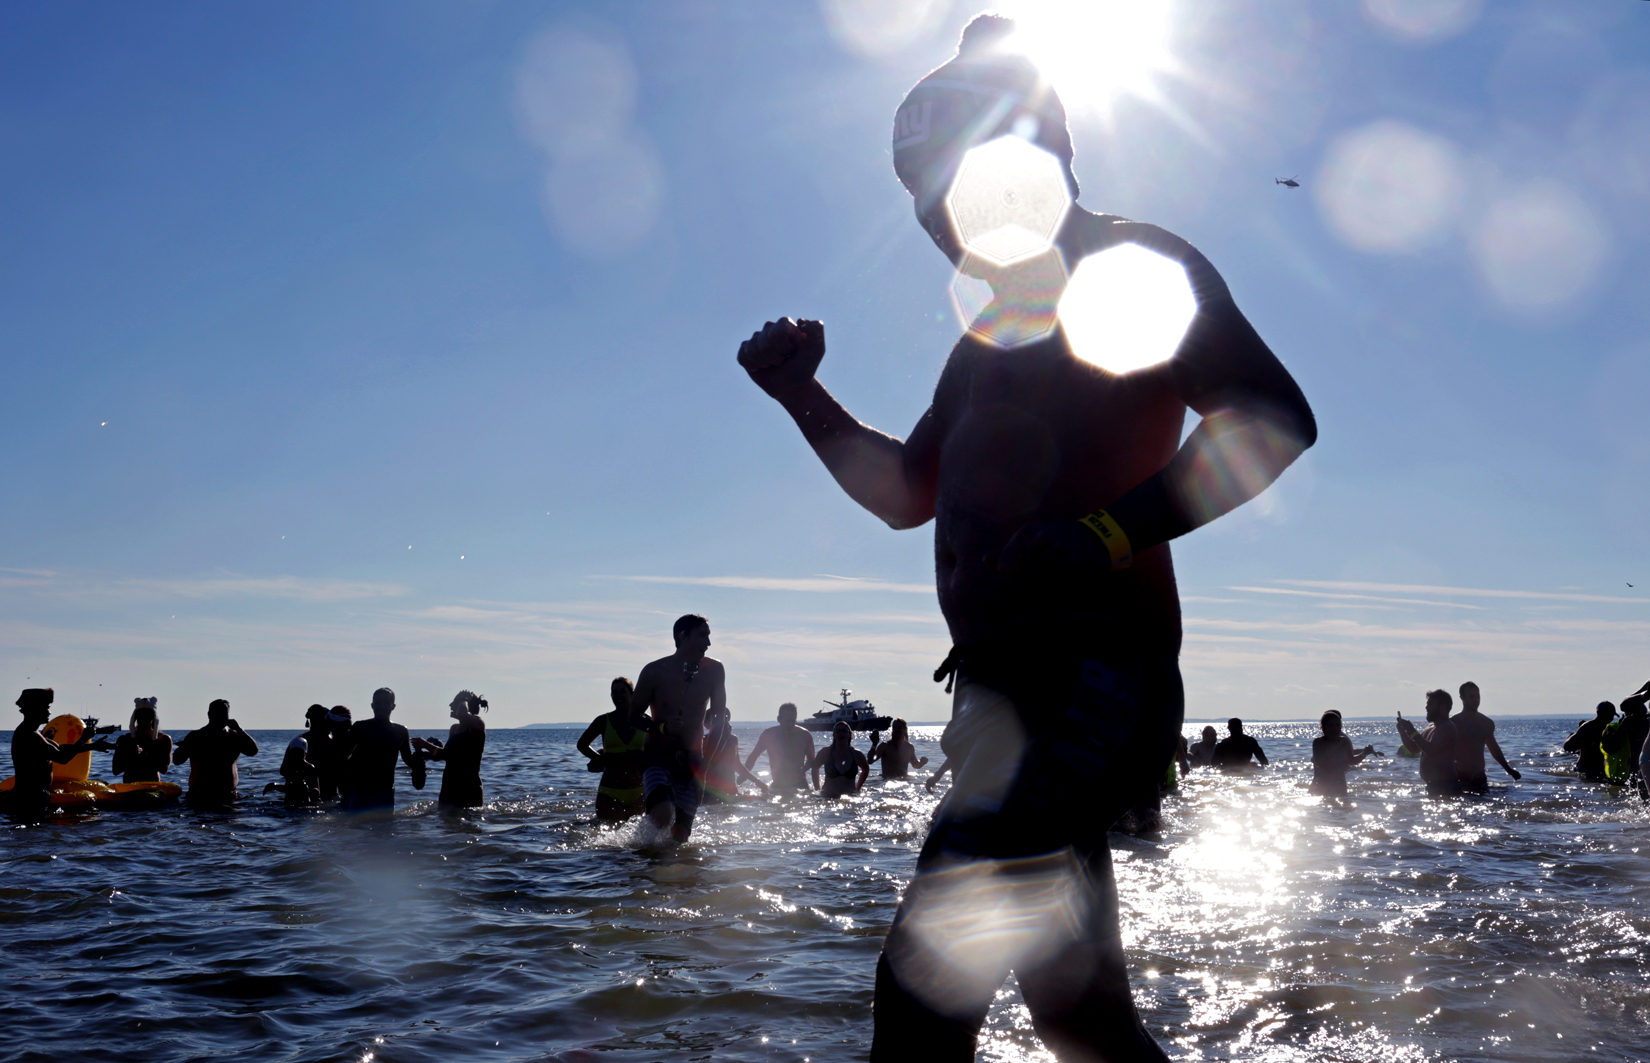 Swimmers run into the ocean during Coney Island Polar Bear Club's New Year's Day Plunge in Brooklyn, NY on January 01, 2017. (For Getty Images)